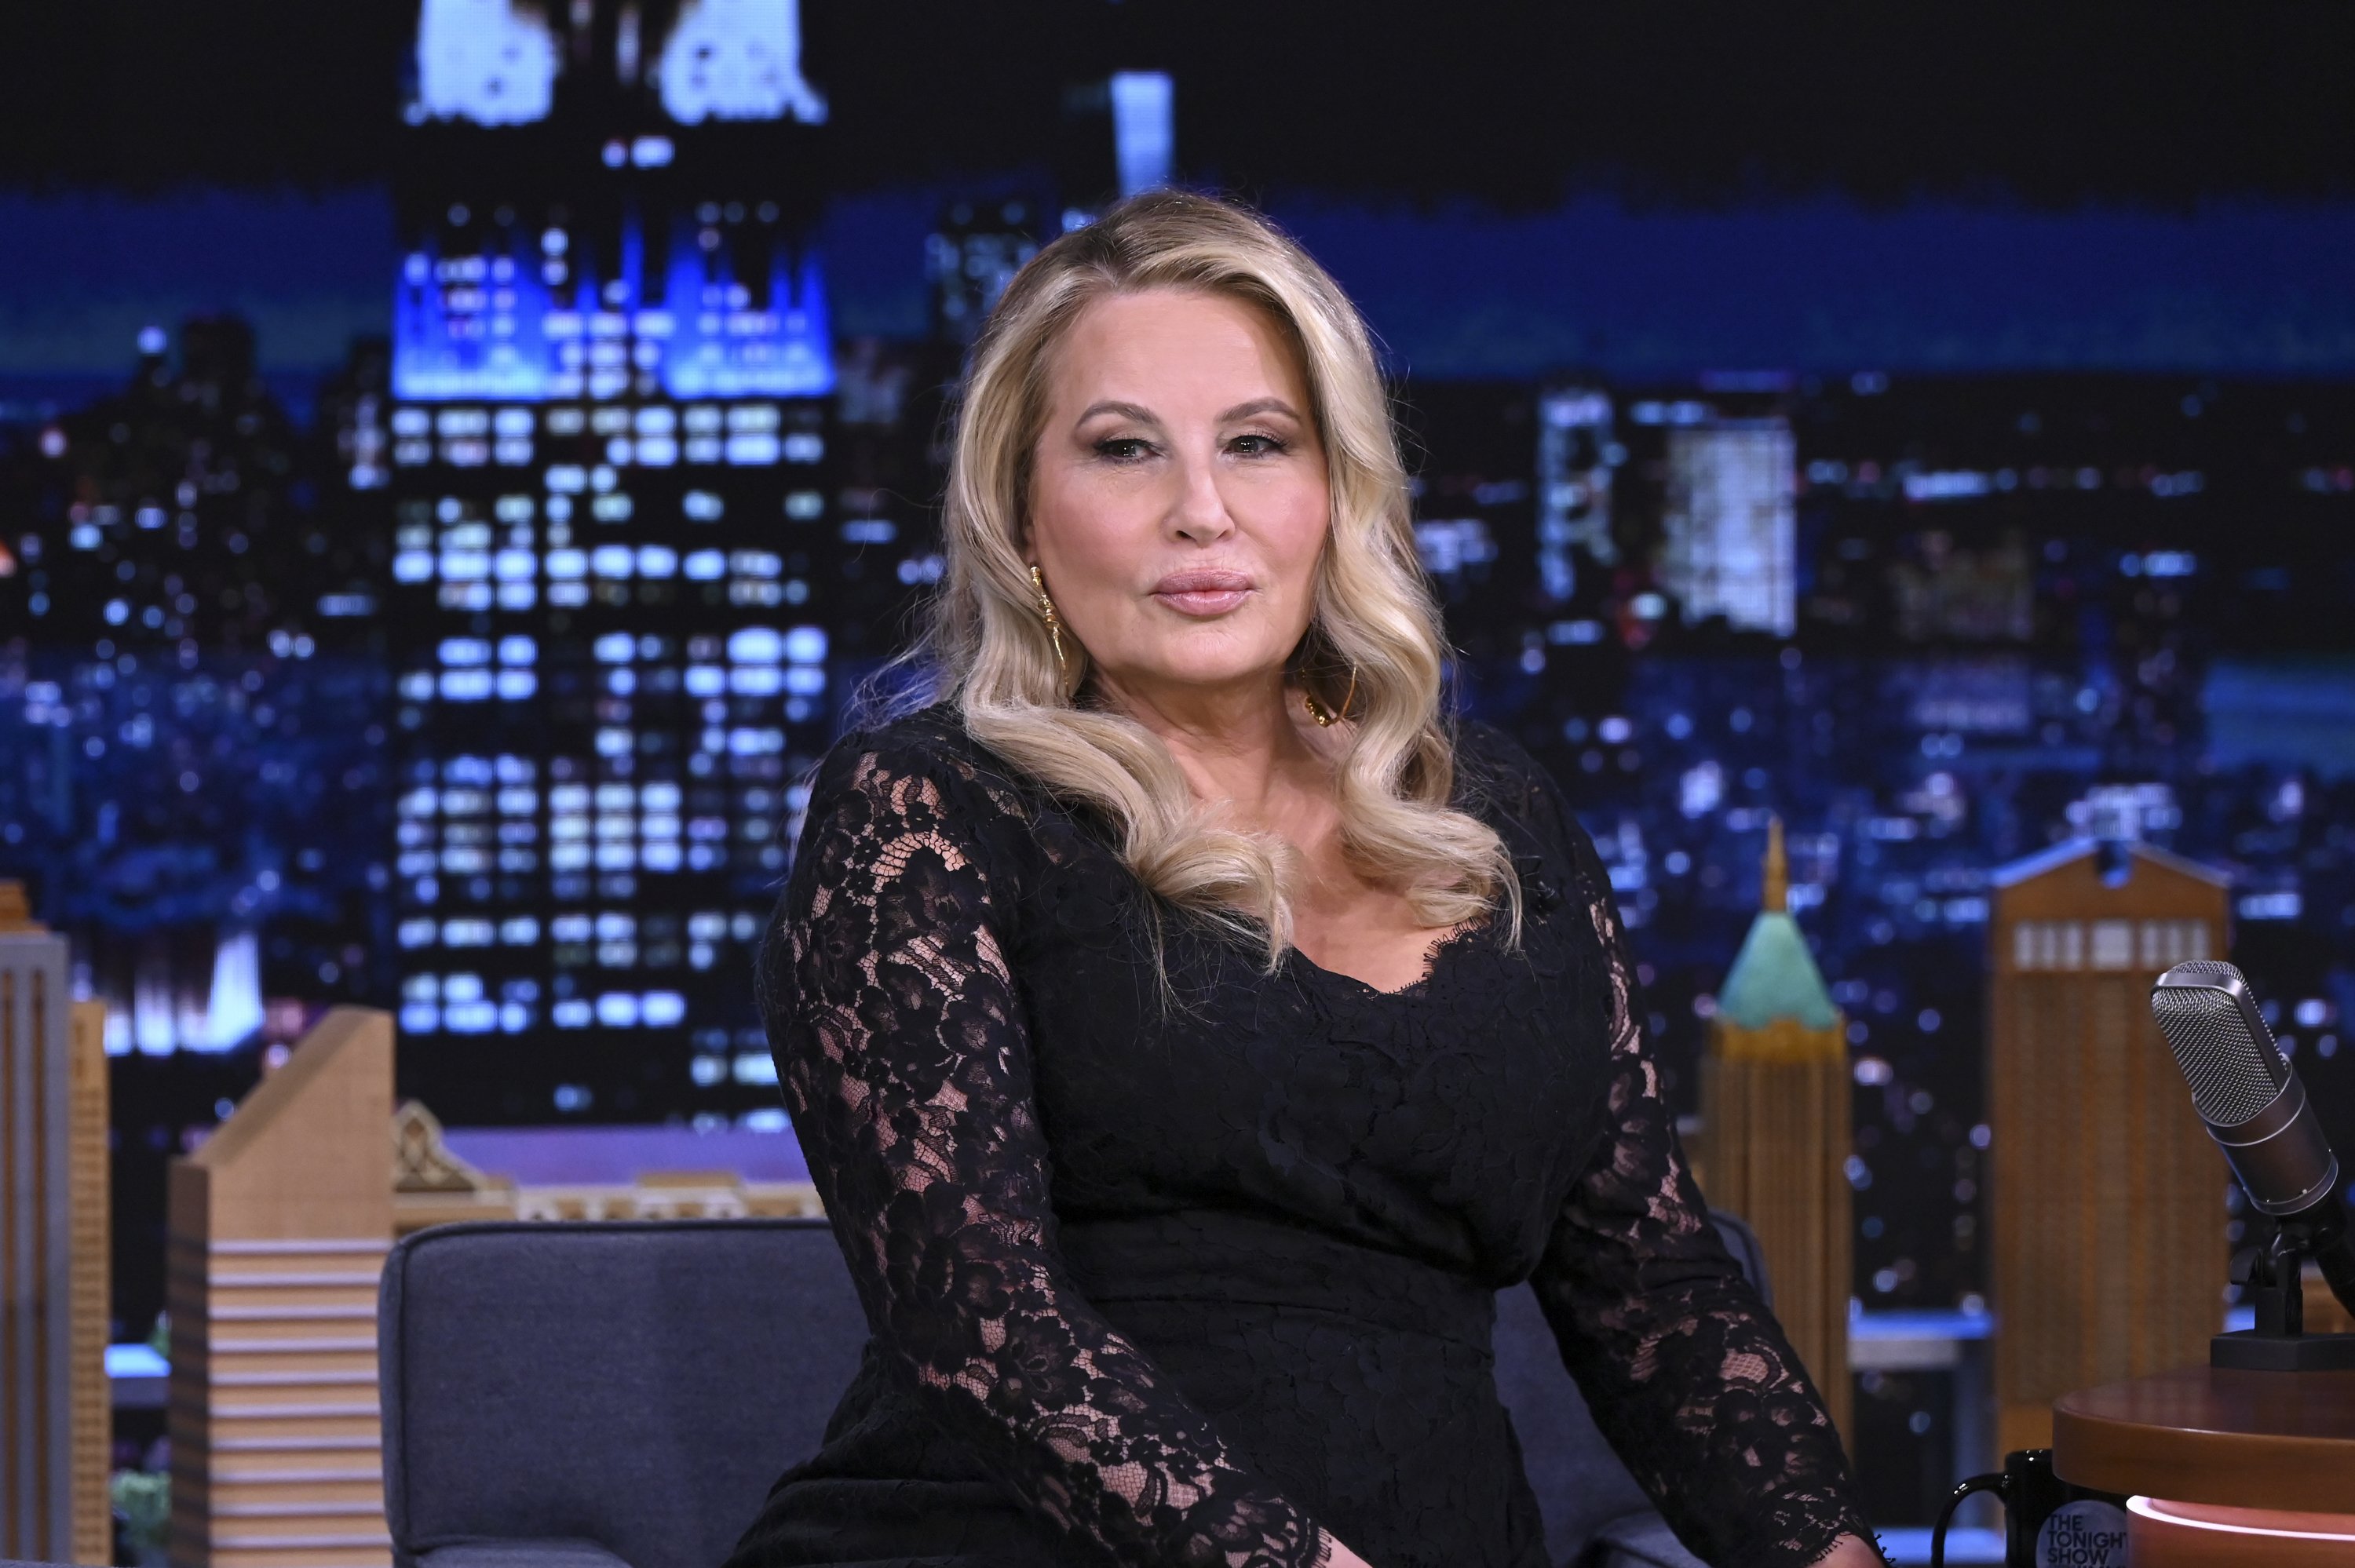 Jennifer Coolridge during an interview on The Tonight Show, Hosted by Jimmy Fallon on January 20, 2022. | Source: Getty Images